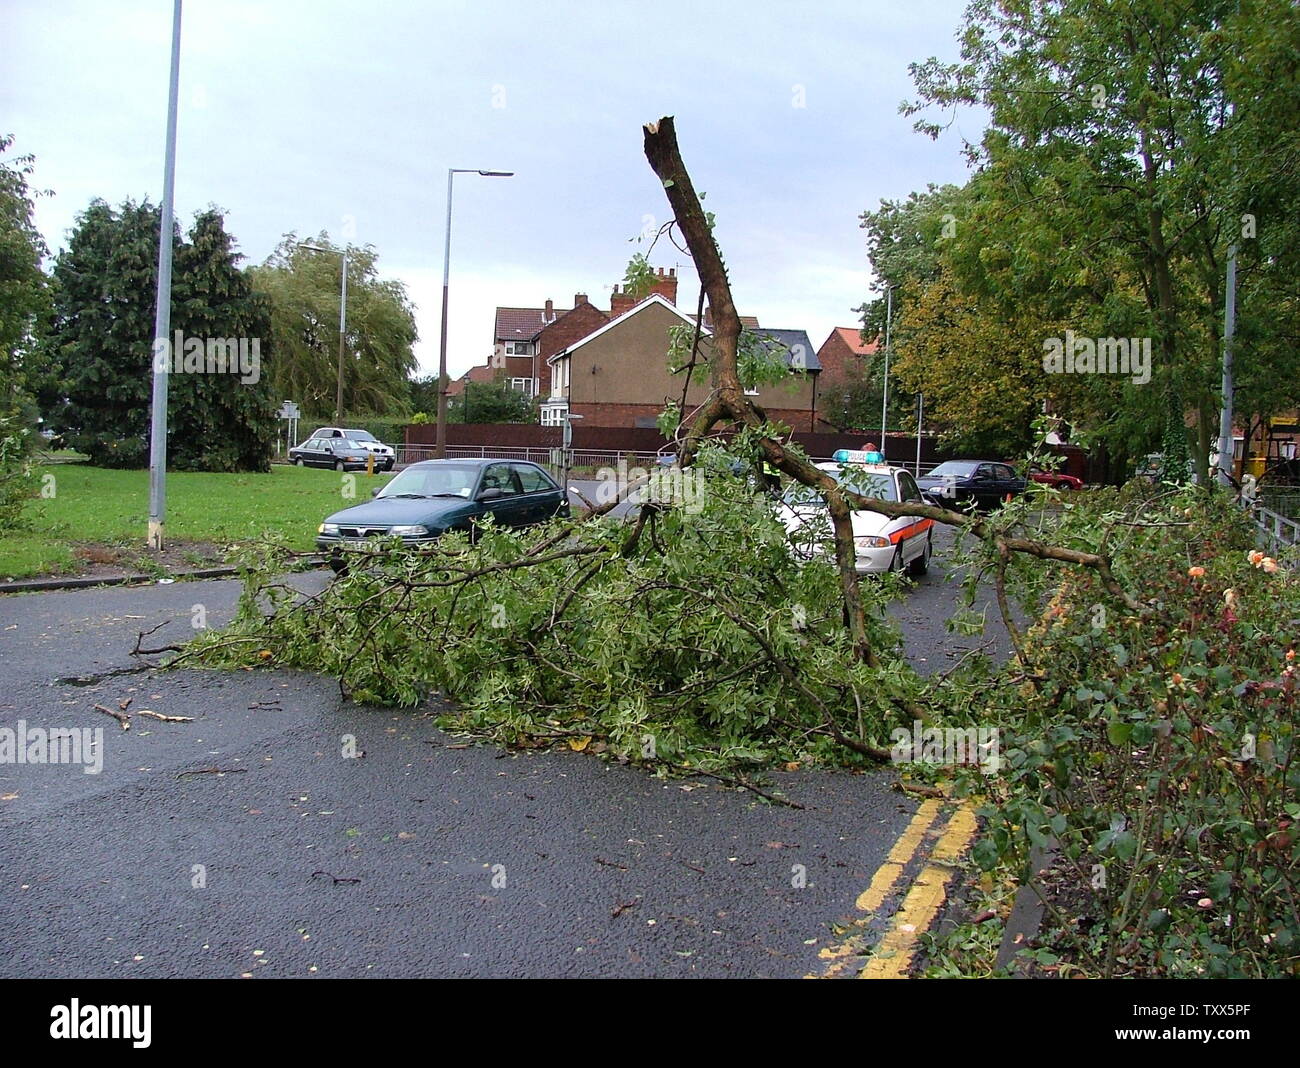 gale force wind brings destruction to trees Stock Photo